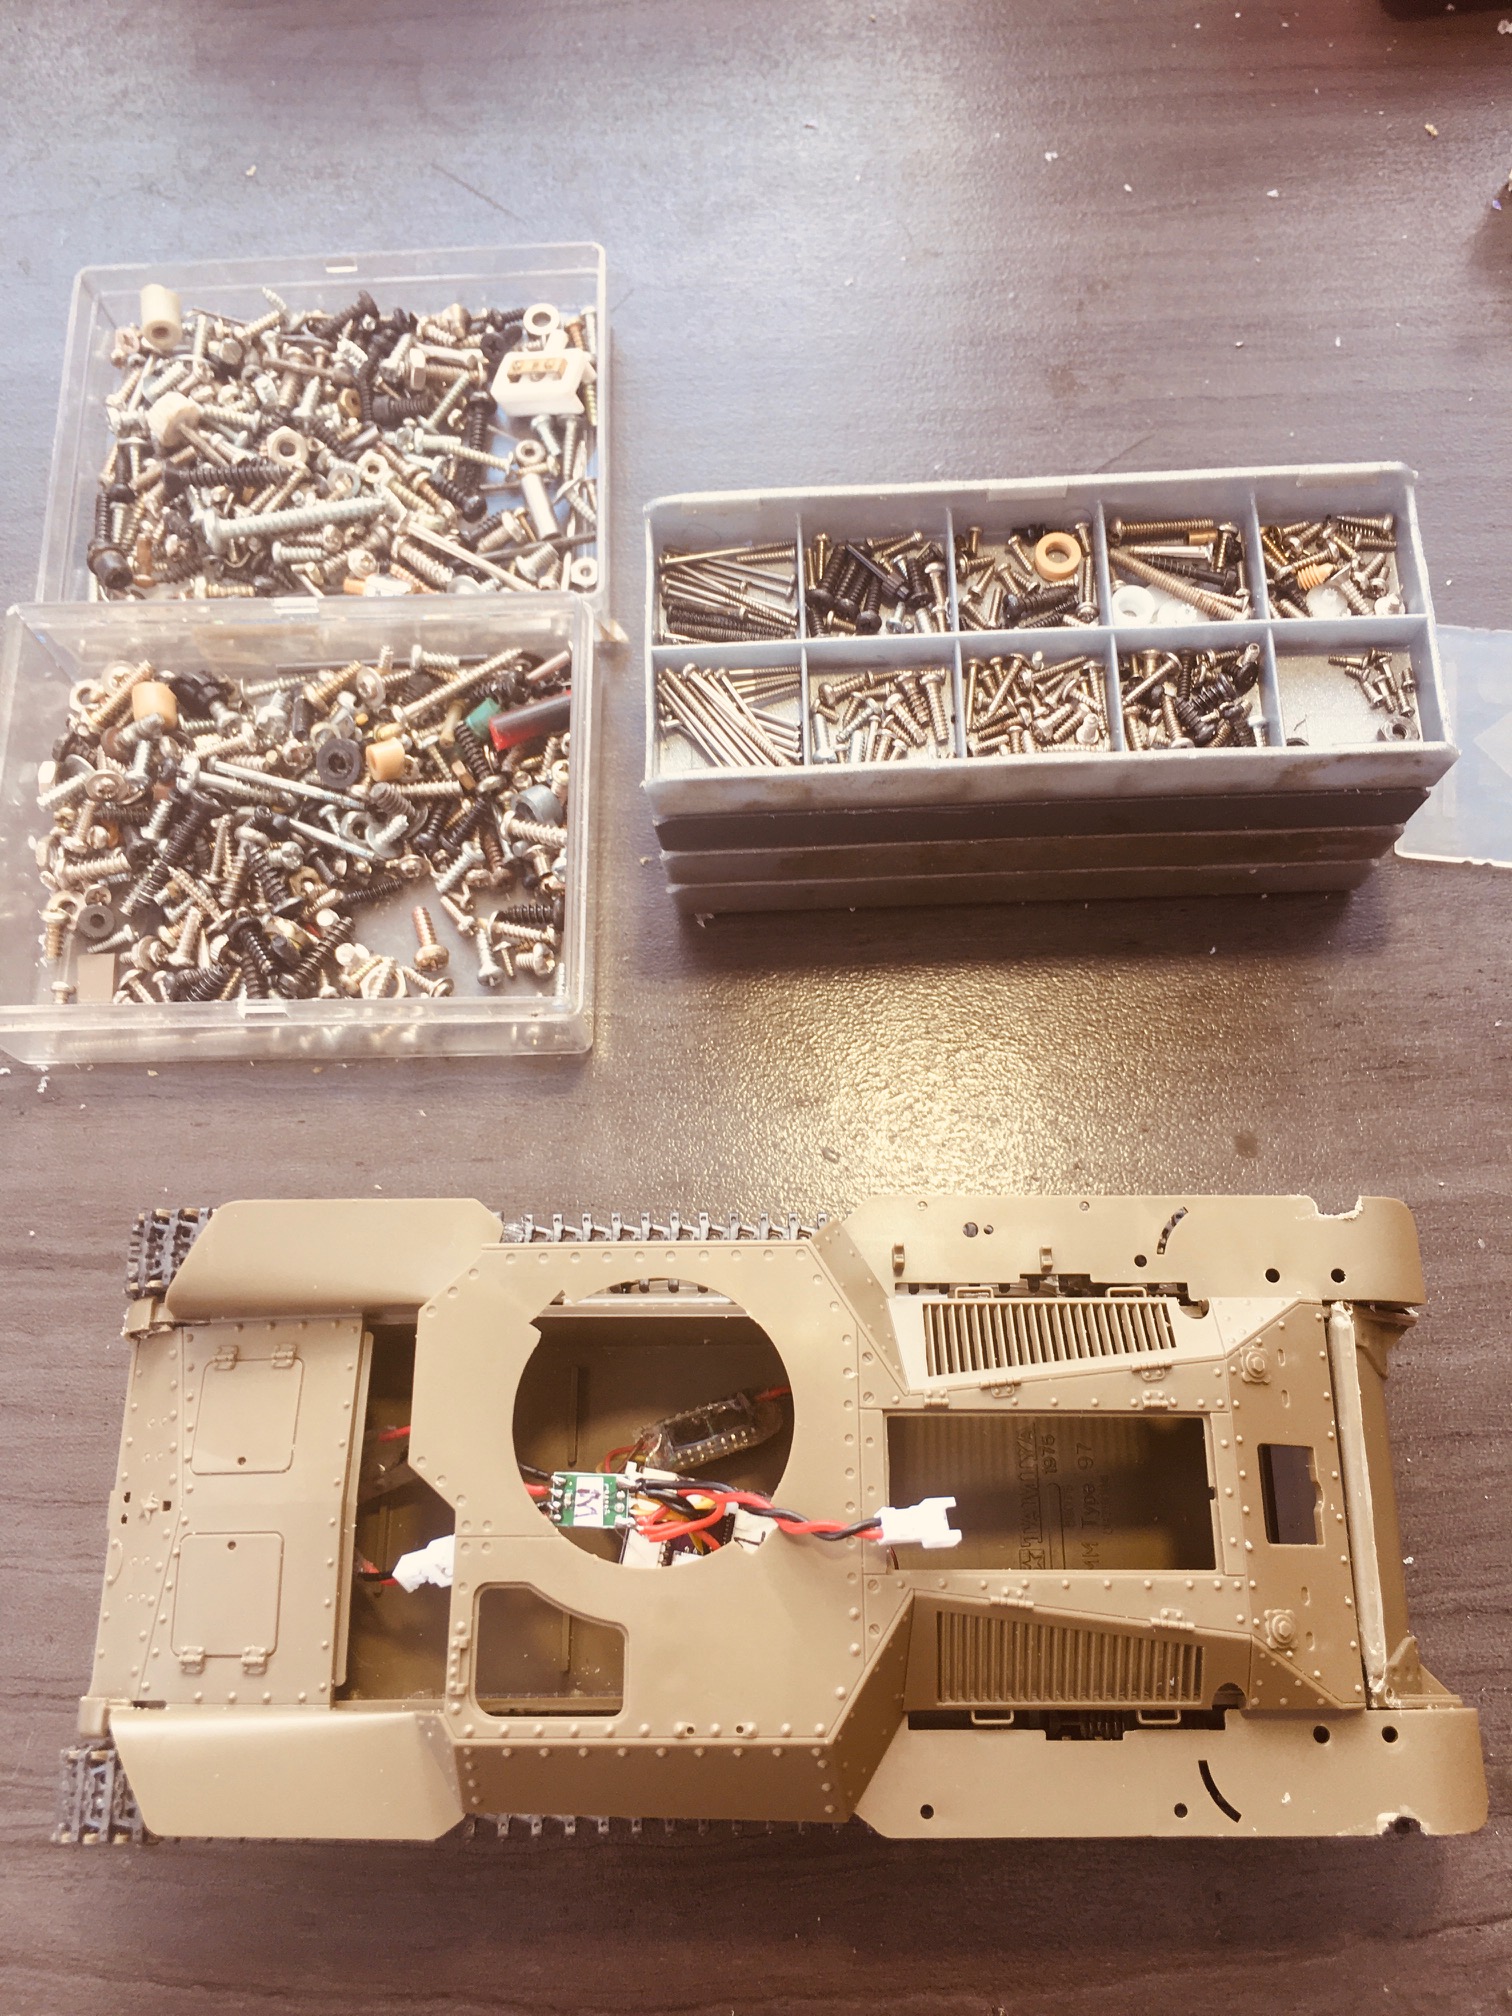 Some of the hardware I use in the 1/35 models. I used 6 micro screws in the T97.